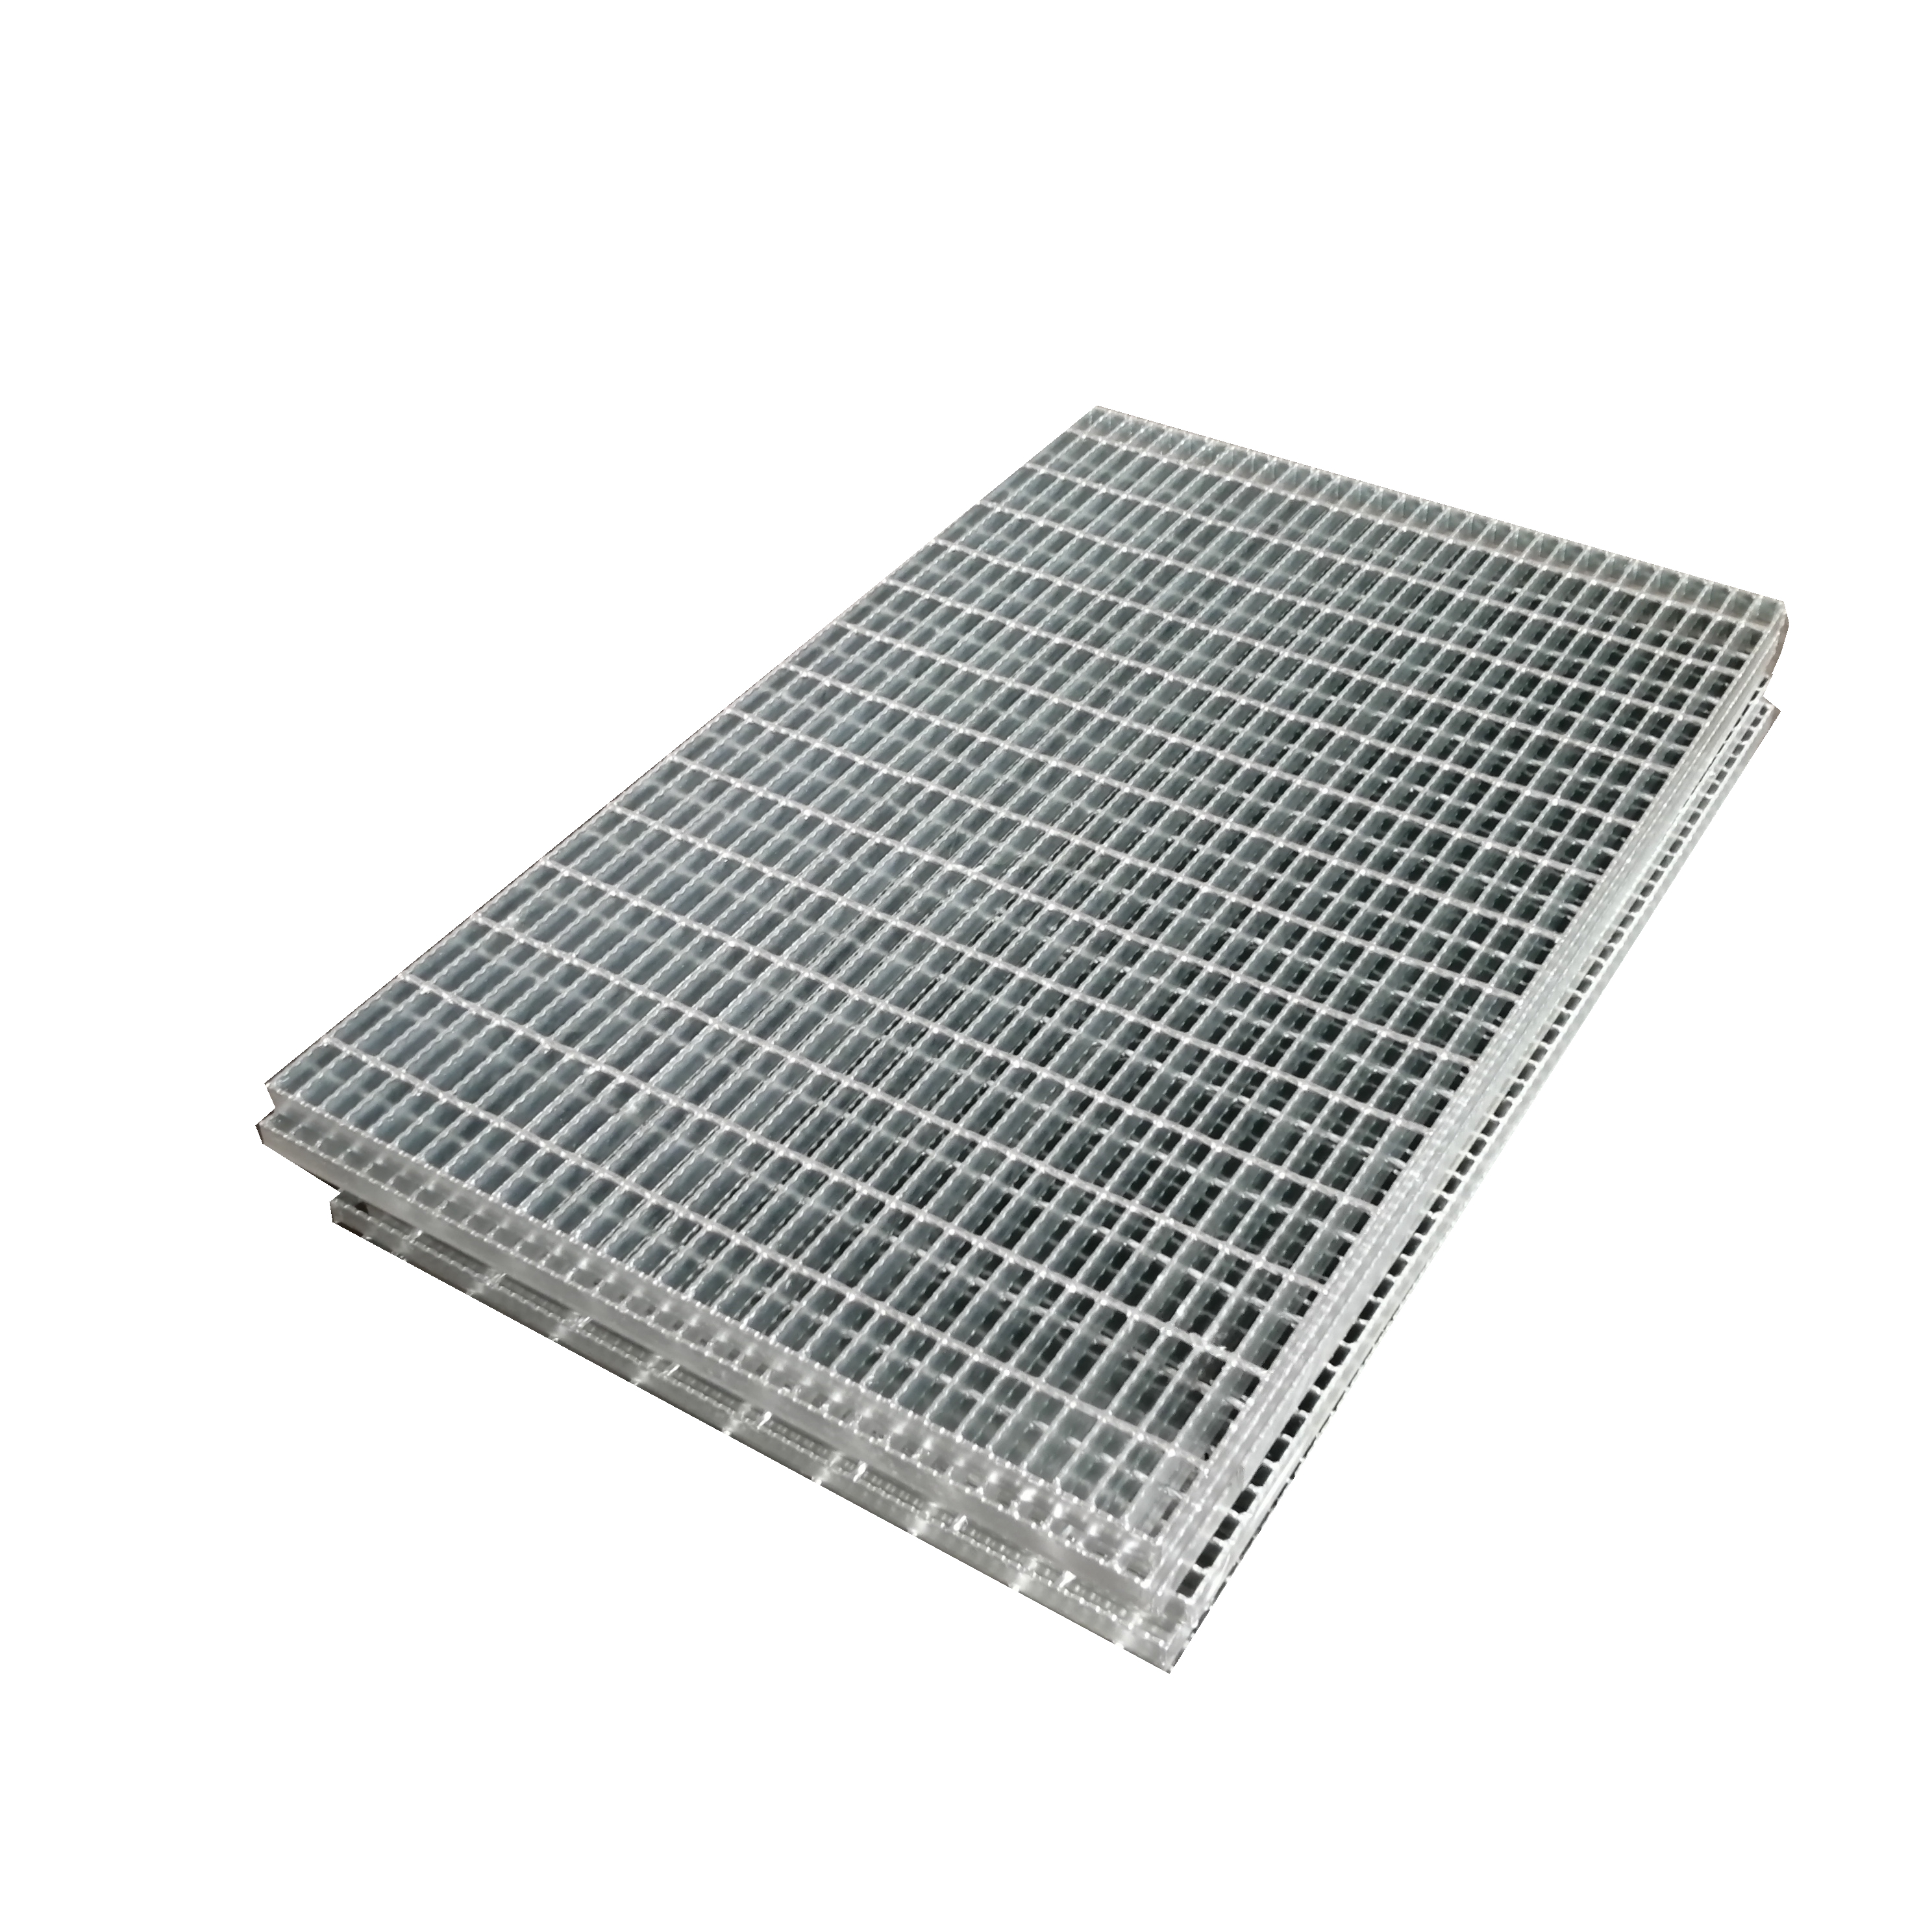 The price of Stainless Steel galvanized steel walkway grating